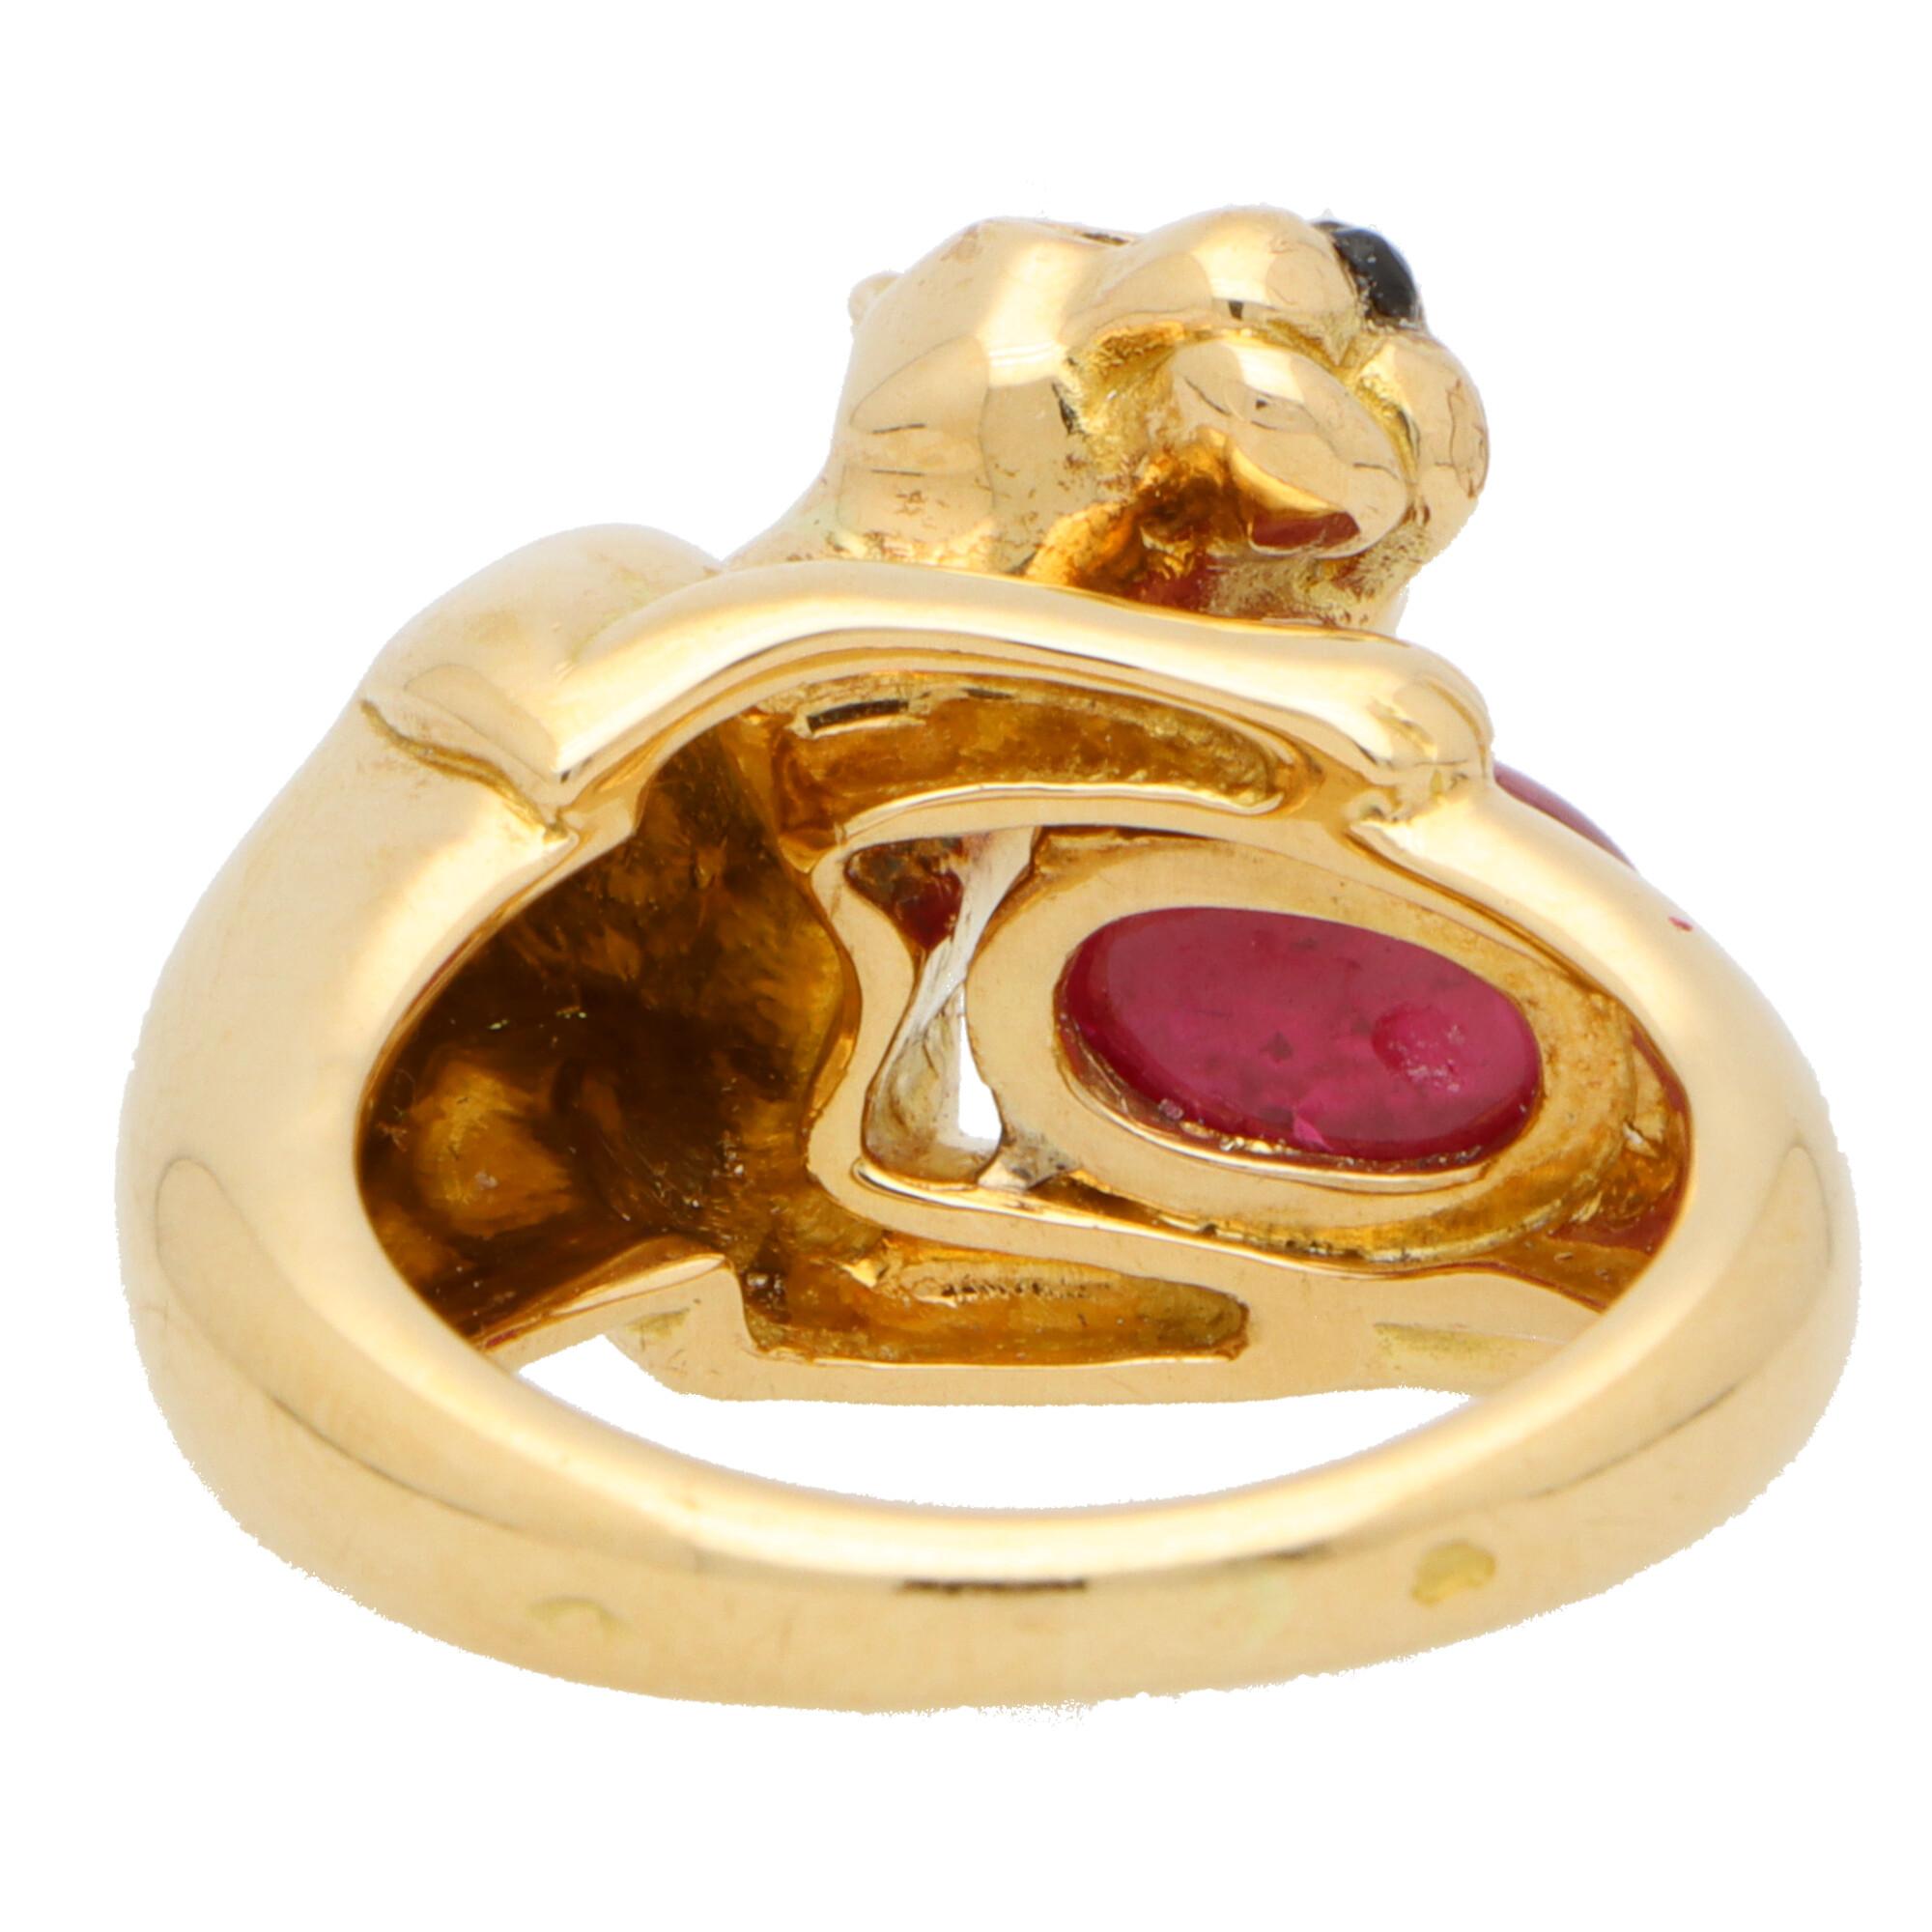 Cabochon Vintage Panthère De Cartier Ruby and Emerald Panther Ring Set in 18k Yellow Gold